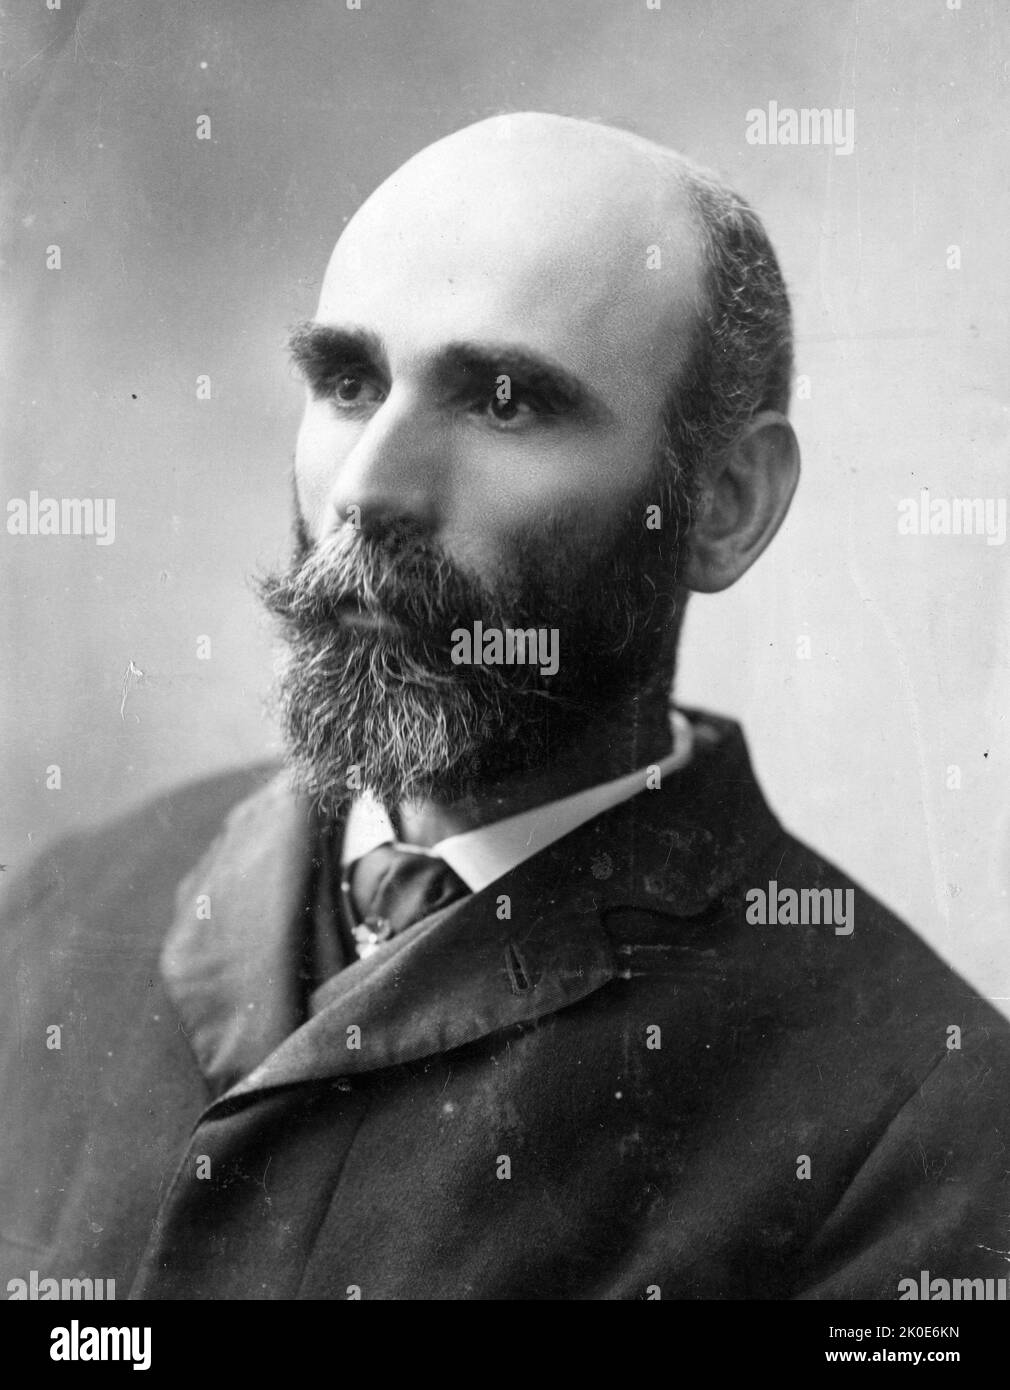 Michael Davitt (1846 - 1906) Irish republican activist for Home Rule and land reform. He began his career as an organiser of the Irish Republican Brotherhood, which resisted British rule in Ireland with violence. Convicted of treason felony for arms trafficking in 1870, he served seven years in prison. Upon his release, Davitt pioneered the New Departure strategy of cooperation between the physical-force and constitutional wings of Irish nationalism on the issue of land reform. Stock Photo